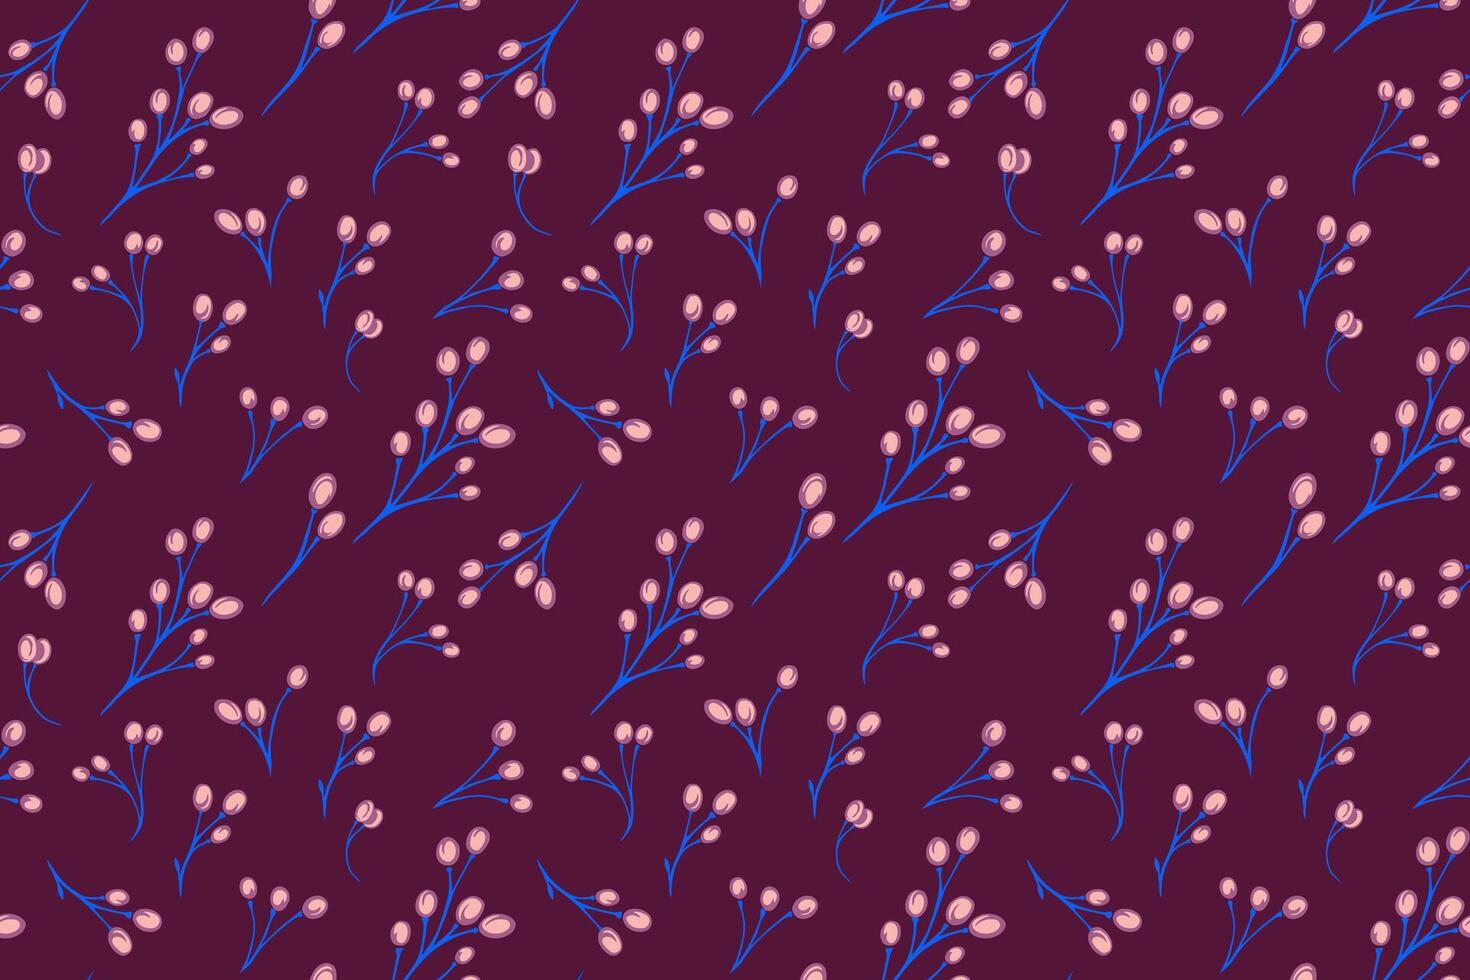 Bright abstract seamless pattern with stylized branches berries on a burgundy background. Creative shapes floral polka dots, drops, spots printing. Vector hand drawn. Design for fabric, fashion